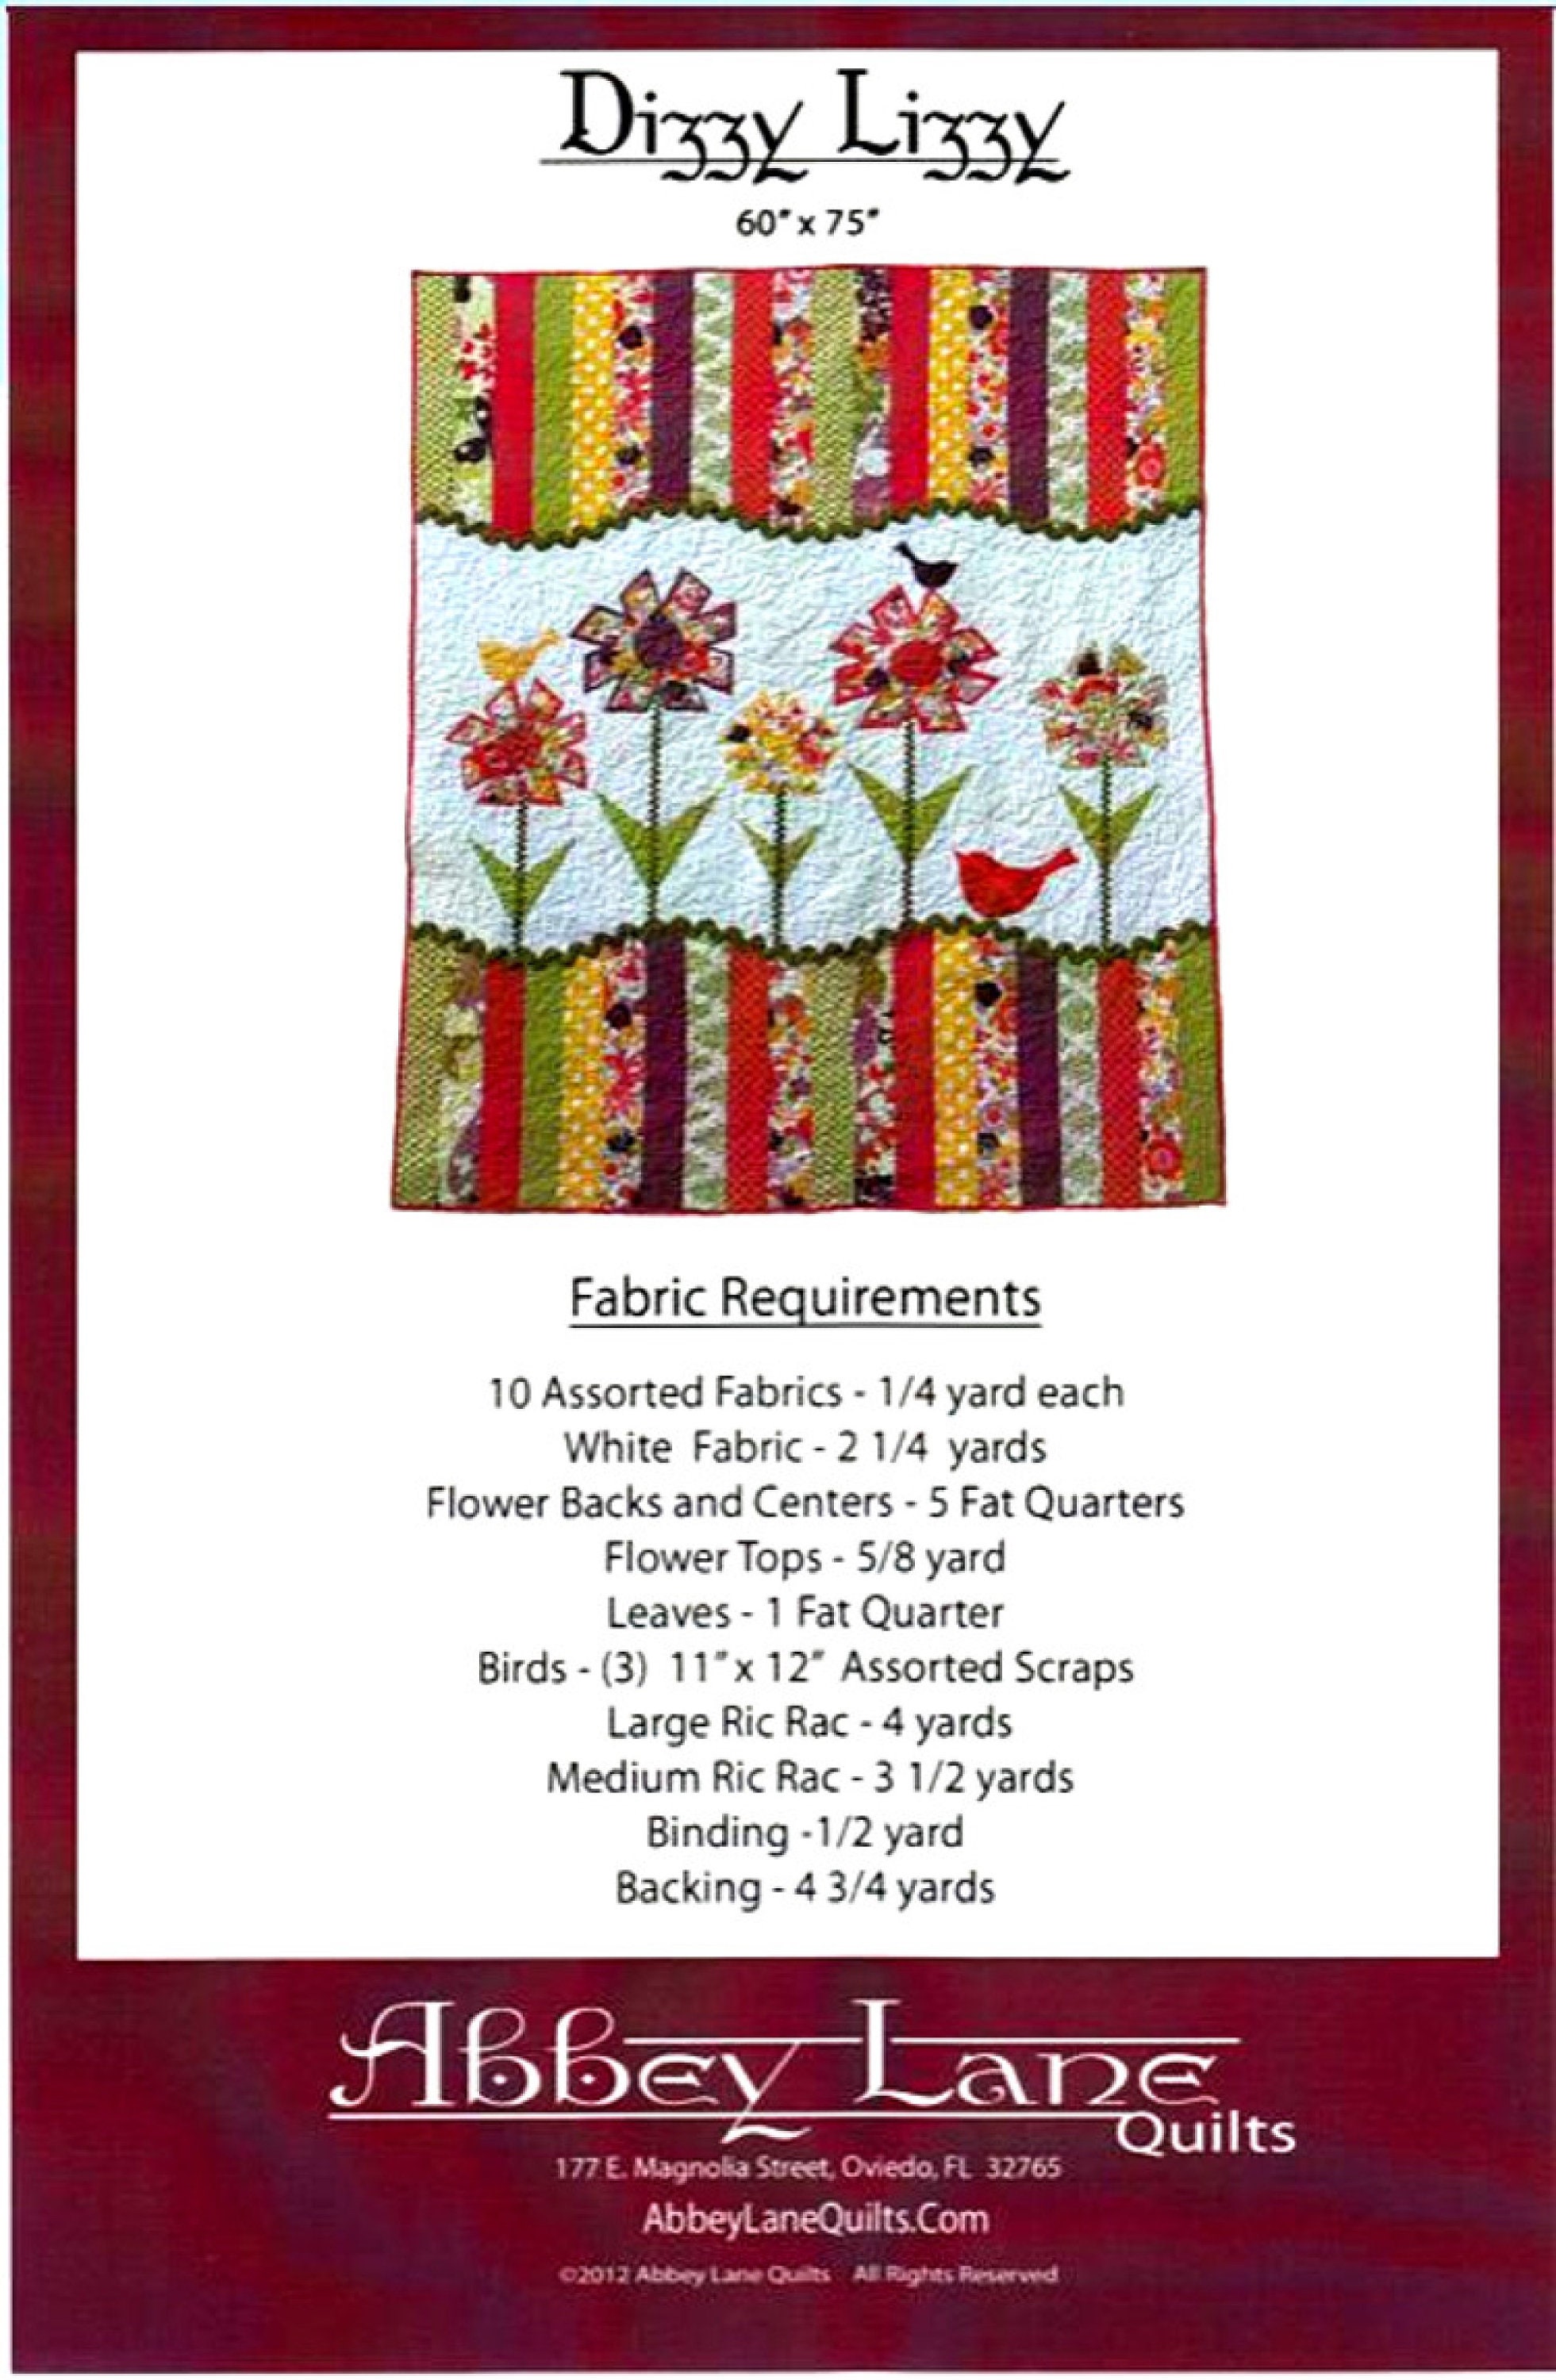 Dizzy Lizzy pieced & Applique Quilt Pattern By: Janice - Etsy